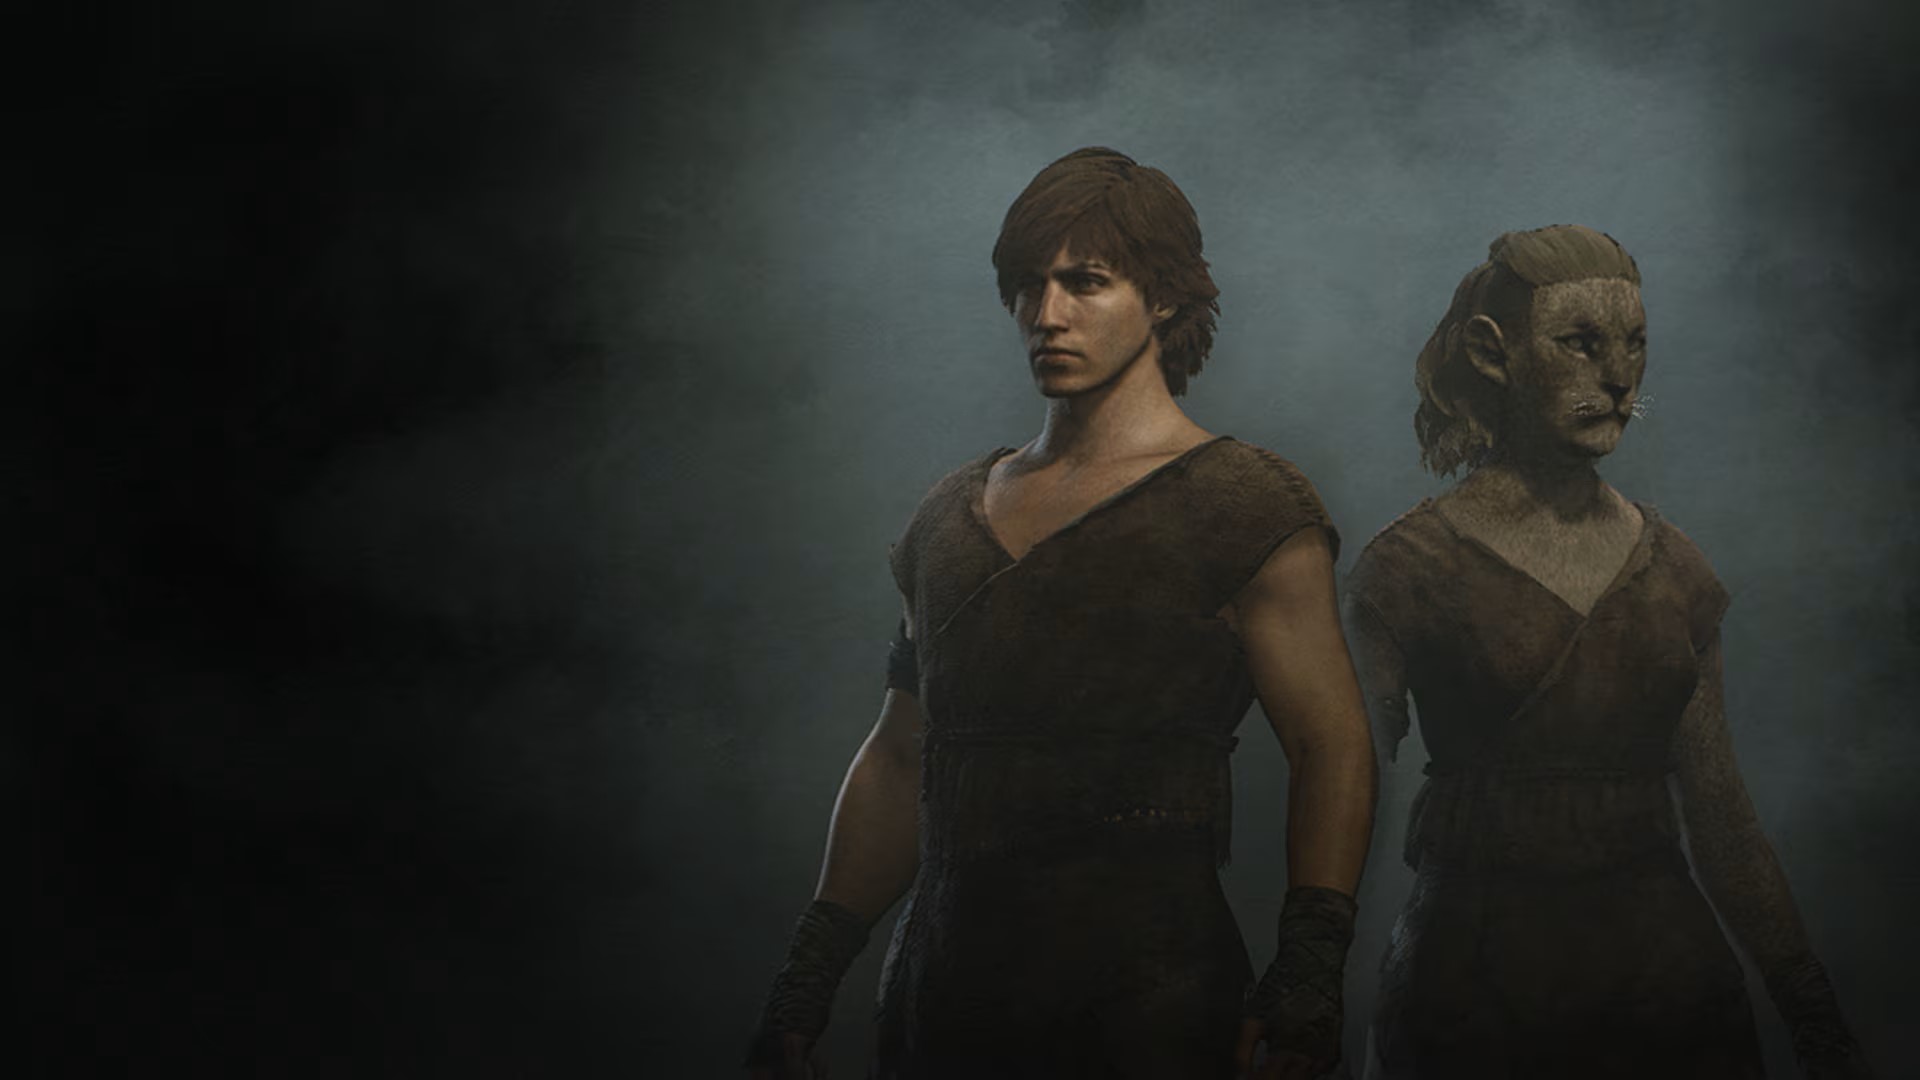 Every RPG should pre-release a free character creator like Dragon’s Dogma 2 has